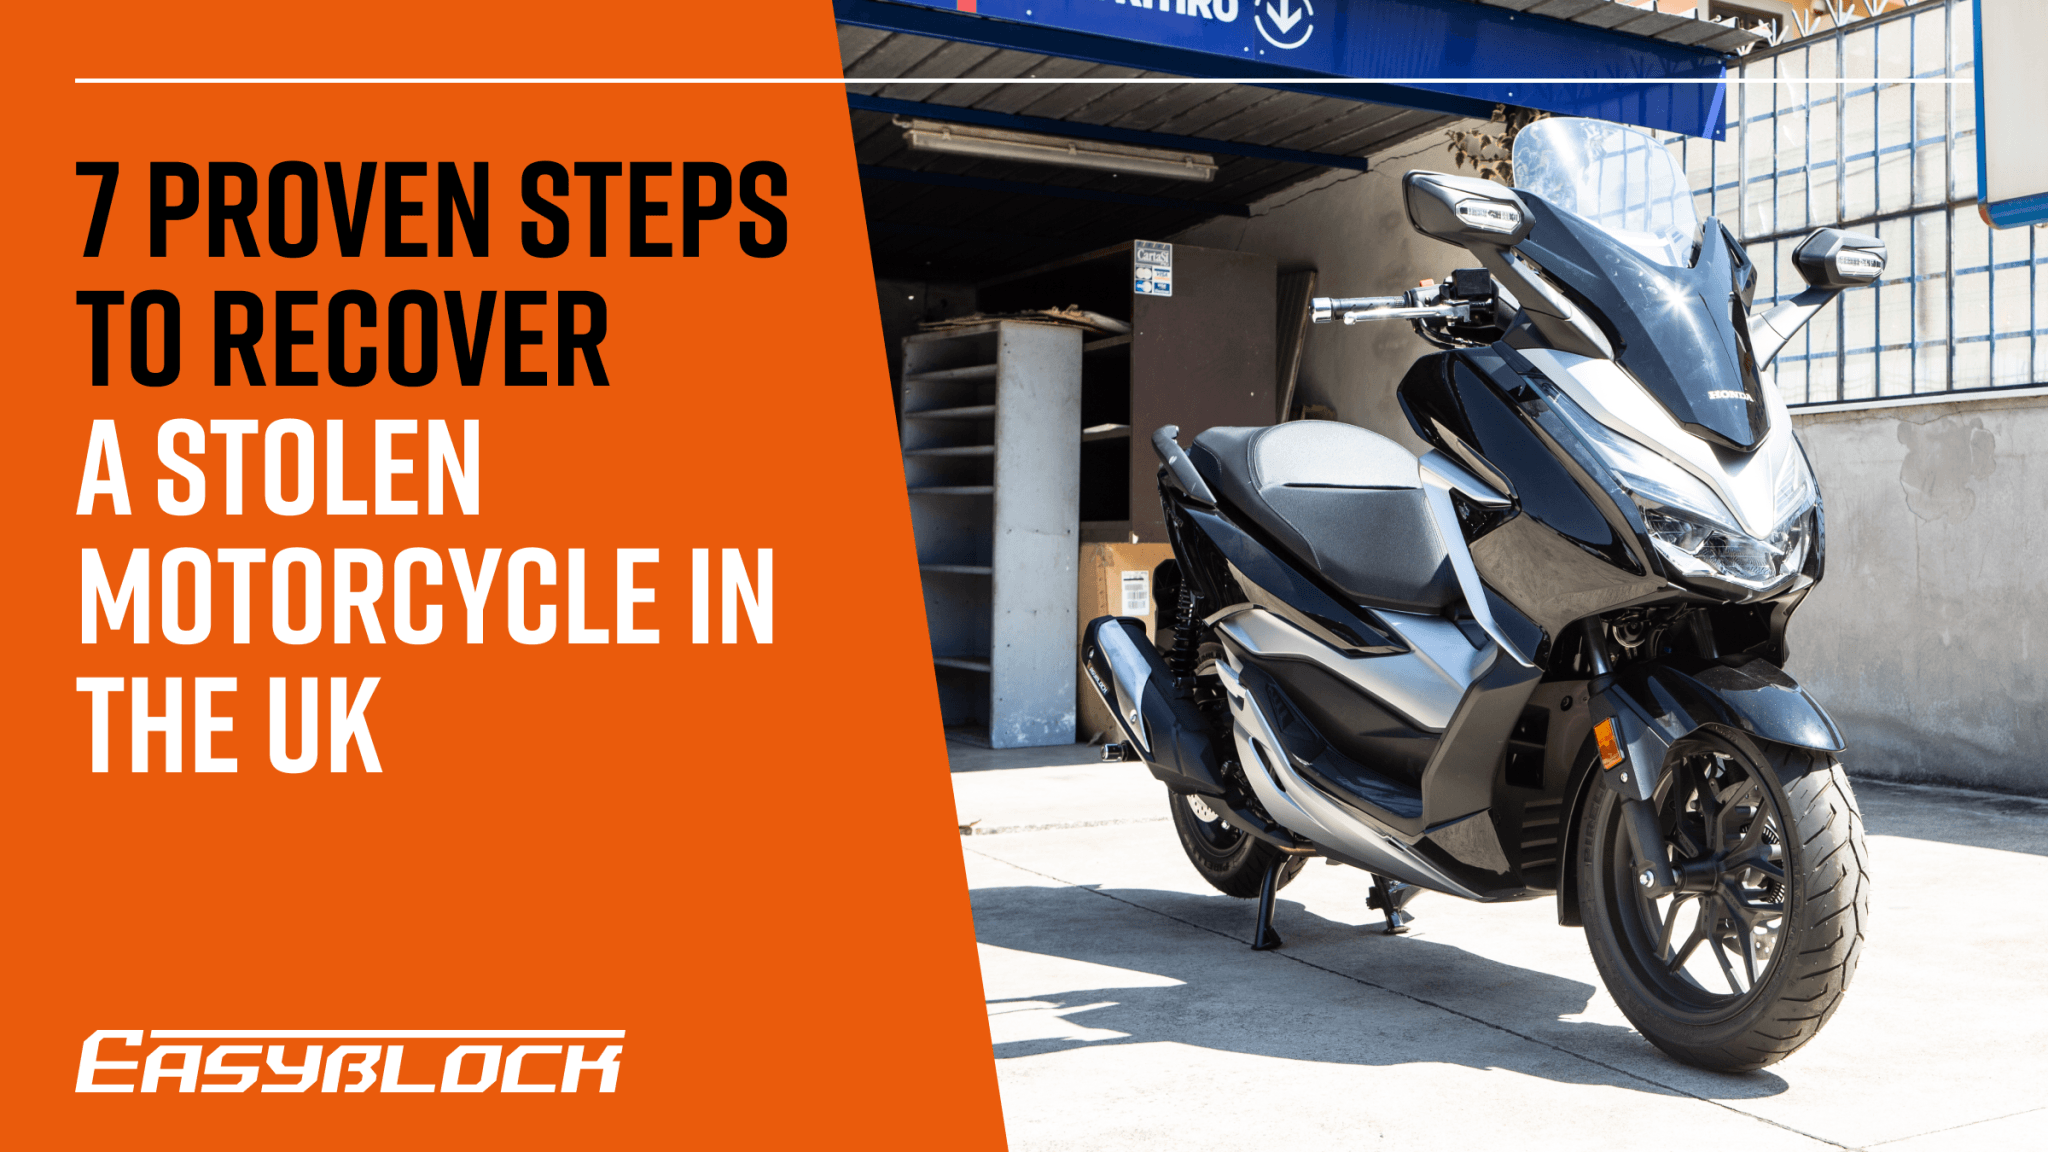 7 Proven Steps to Recover a Stolen Motorcycle in the UK